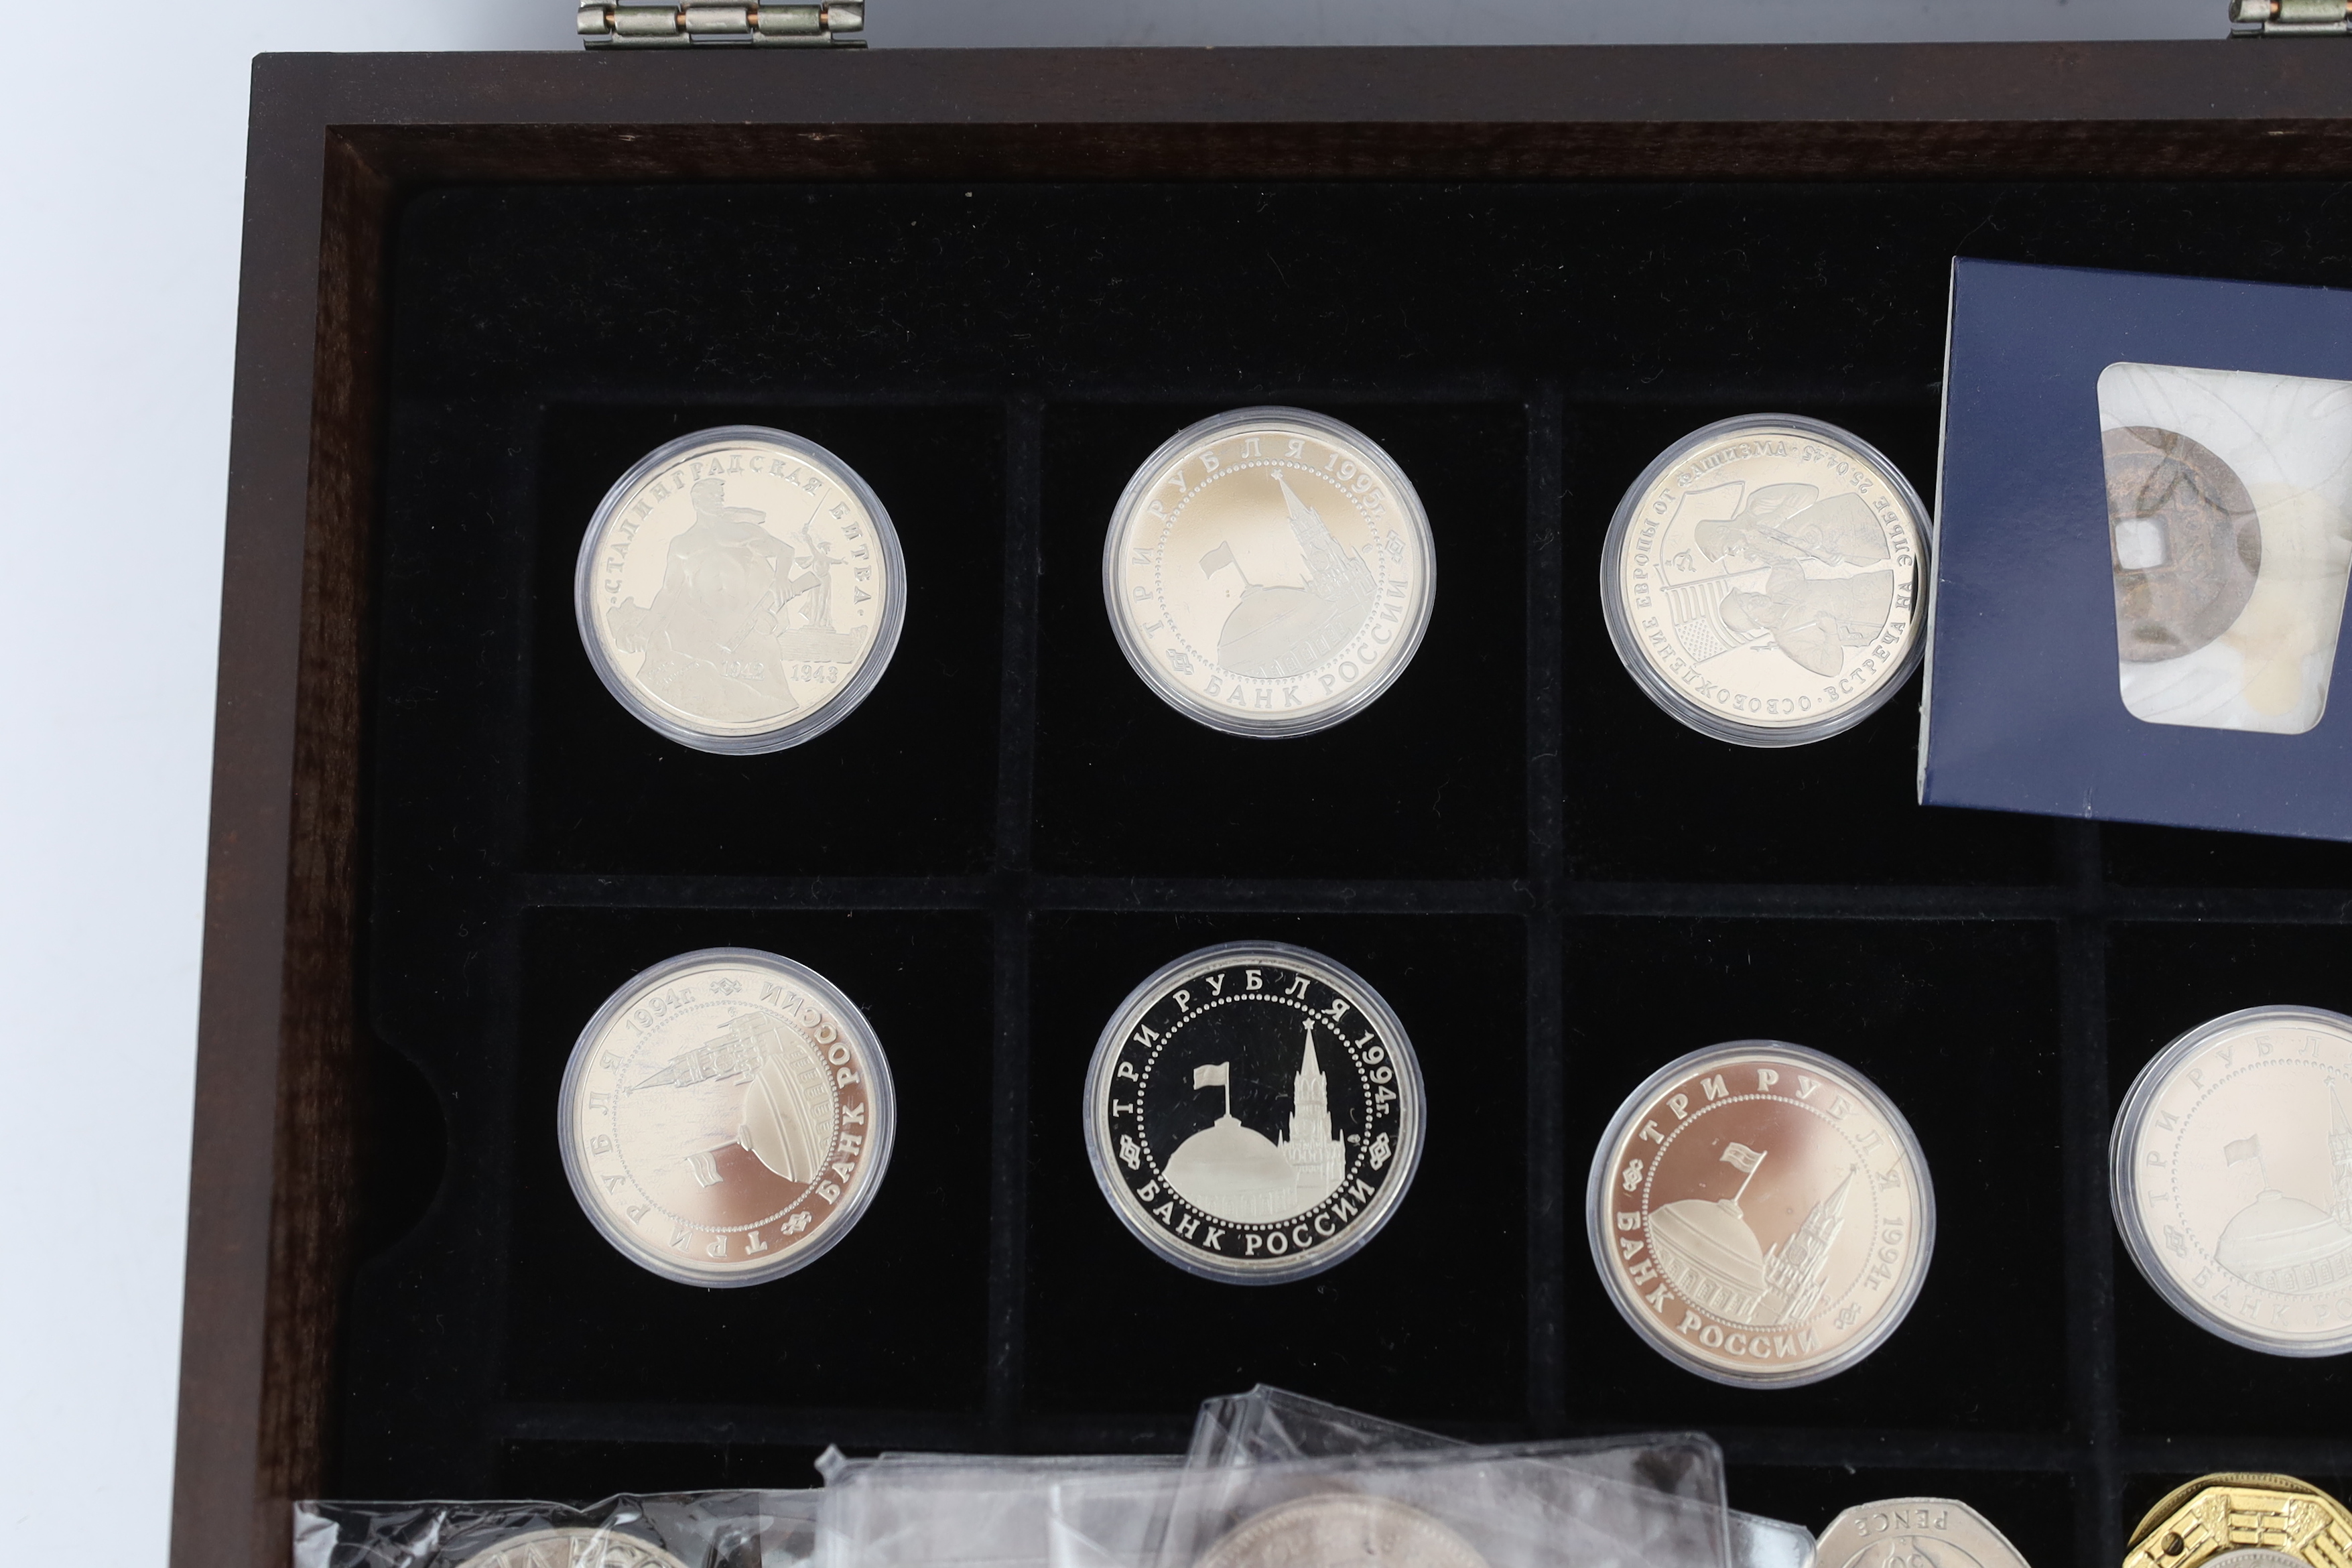 Russian Federation, A collection of 20 proof three rouble coins, 1994 and 1995 and QEII British - Image 3 of 4